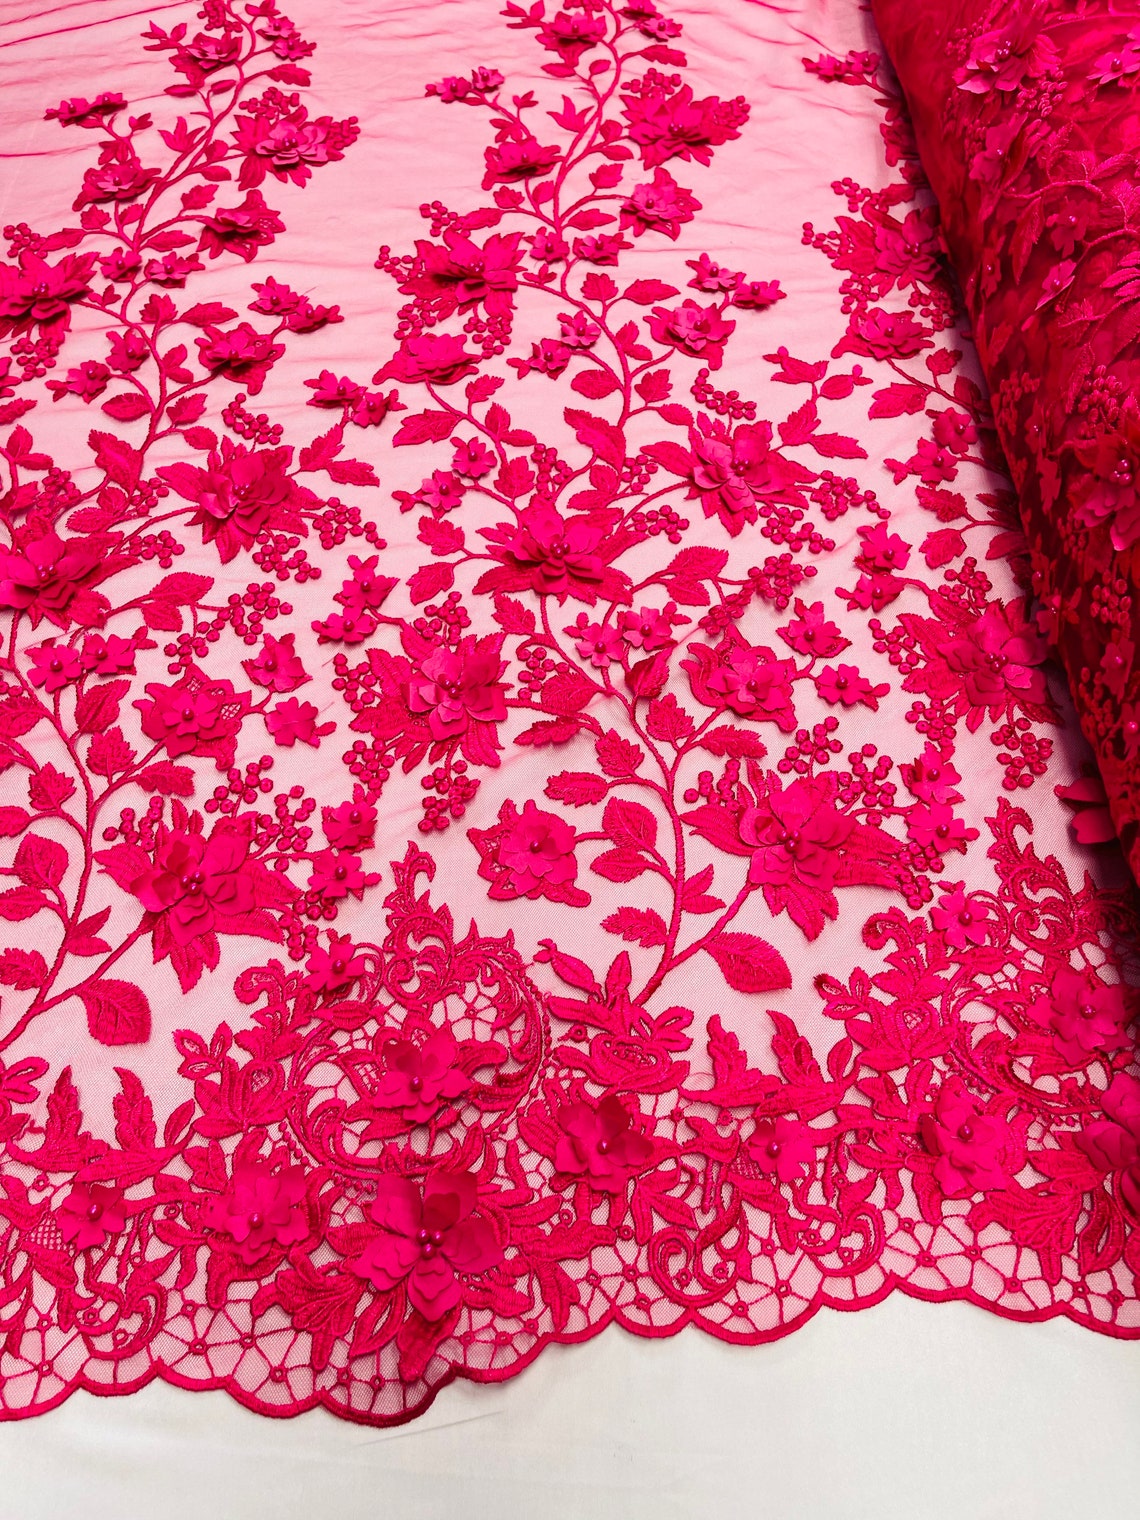 3D Floral Princess Fabric - Fuchsia - Embroidered Floral Lace Fabric with 3D Flowers By Yard